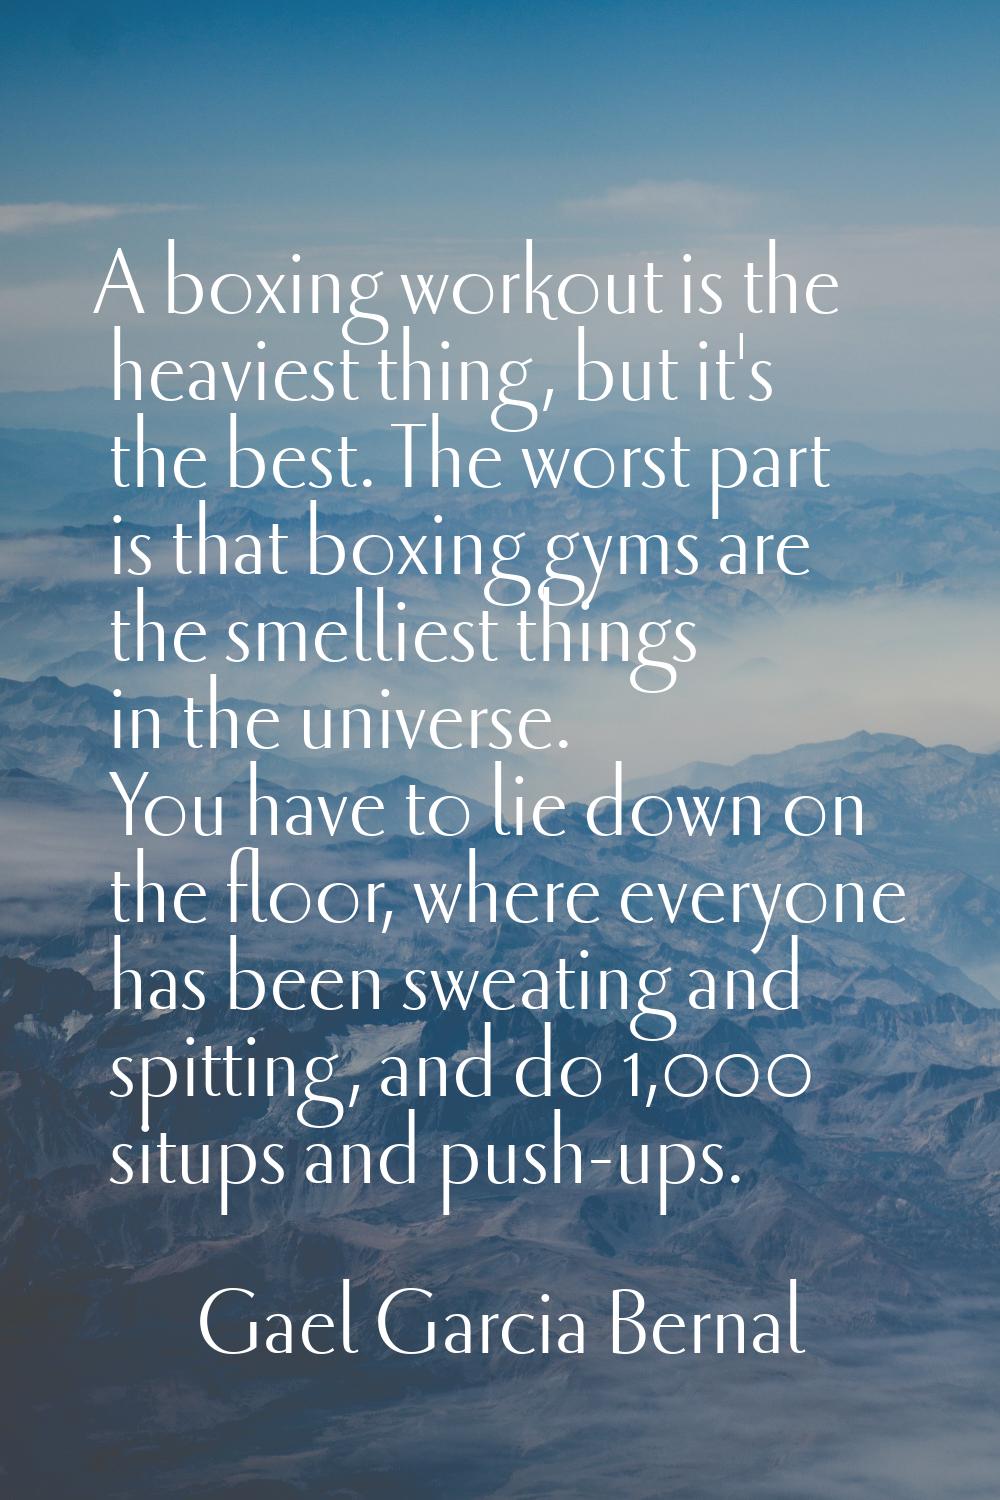 A boxing workout is the heaviest thing, but it's the best. The worst part is that boxing gyms are t